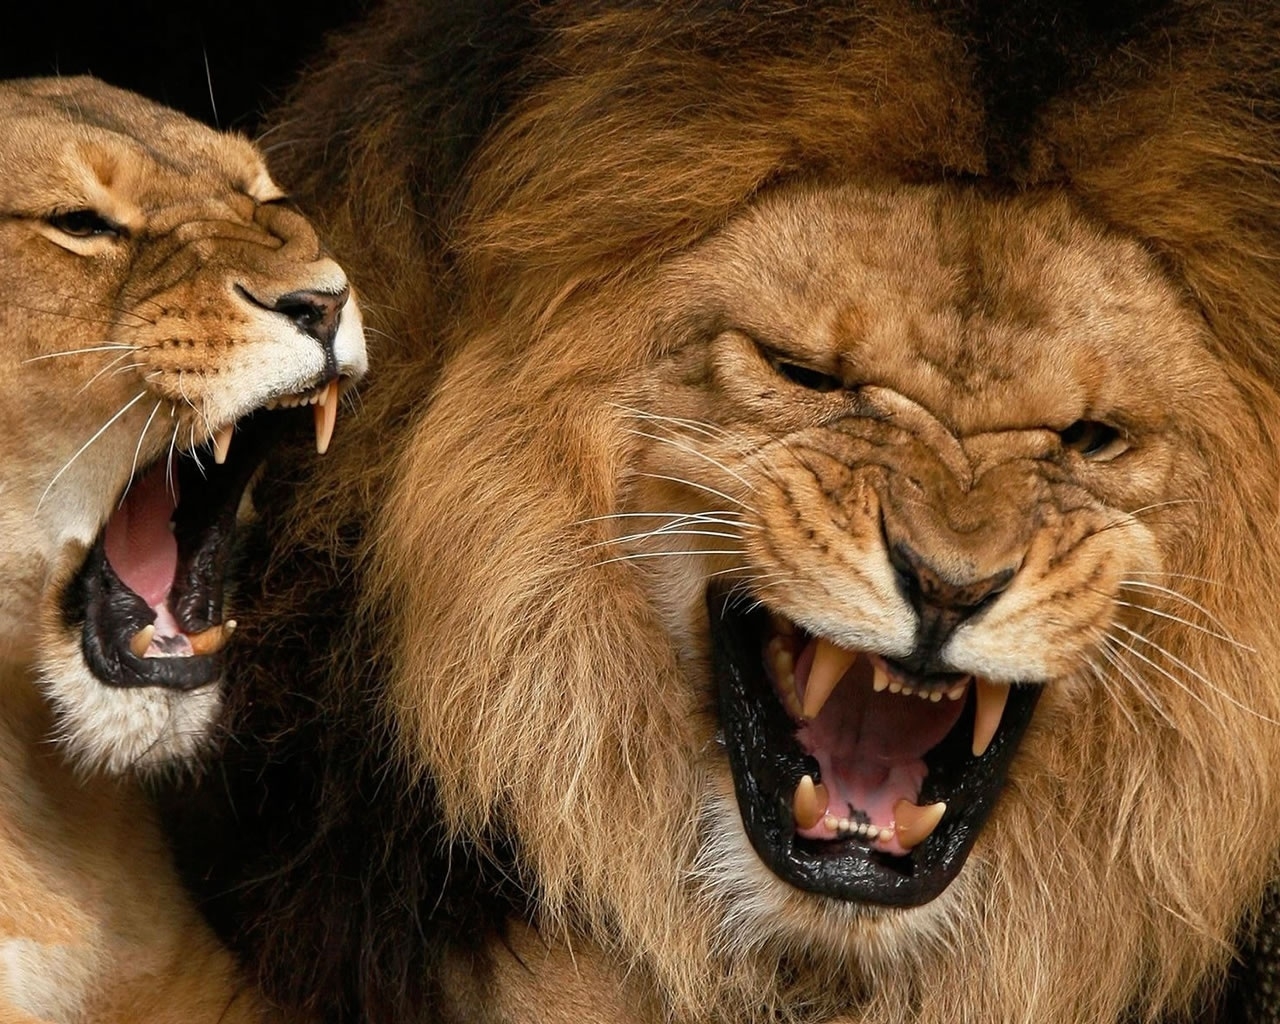 Roaring Lions for 1280 x 1024 resolution